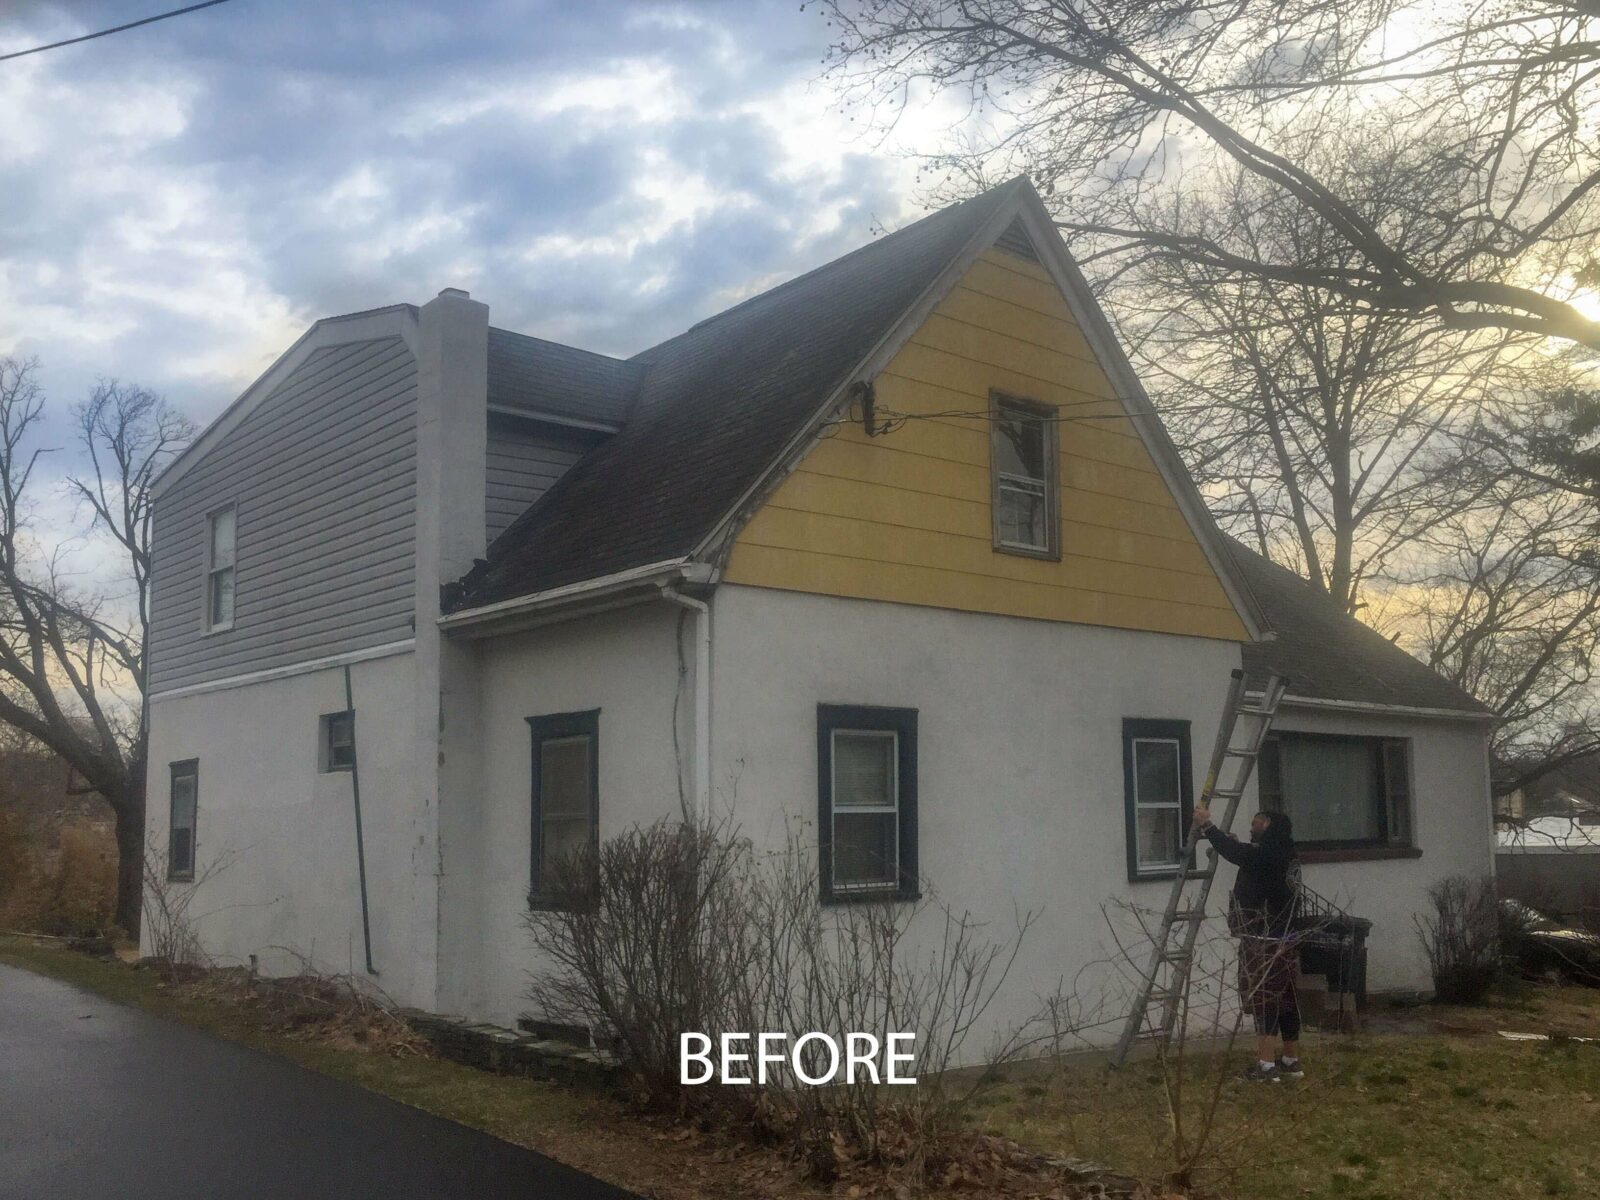 New siding job in Featersville, PA